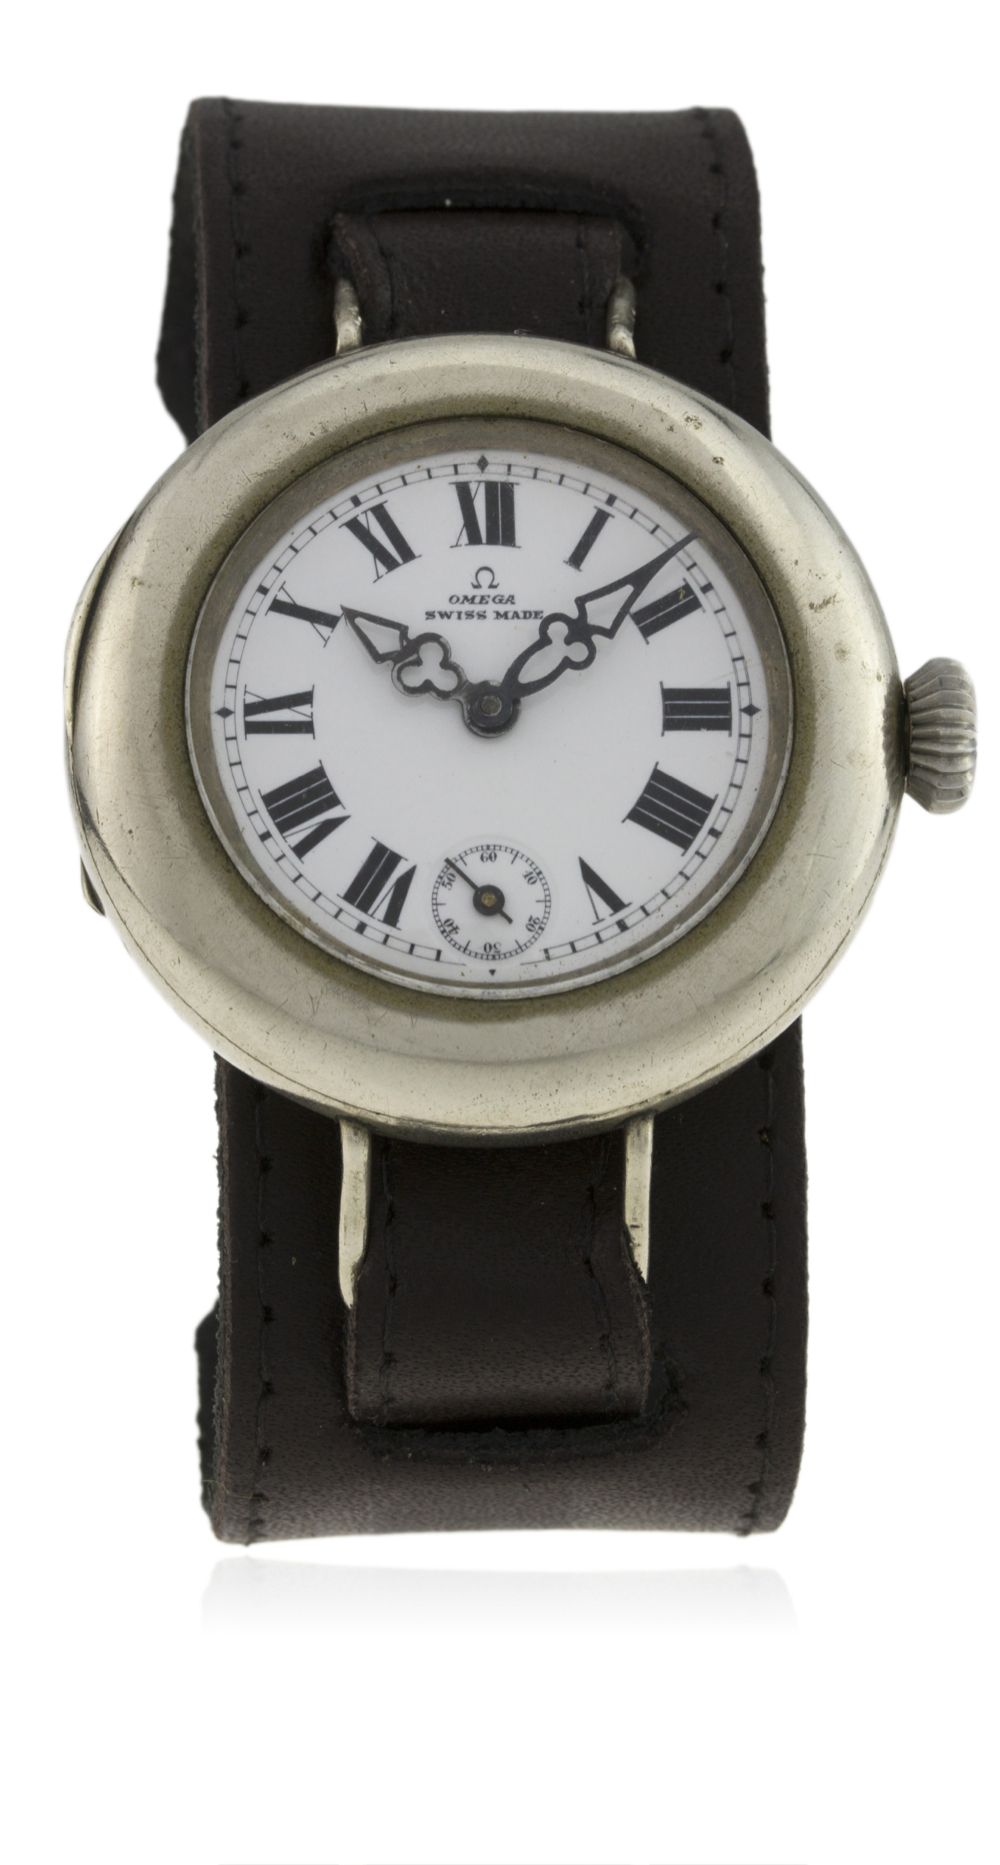 A RARE GENTLEMAN'S LARGE SIZE OMEGA "OFFICERS" WRIST WATCH CIRCA 1916 D: White enamel dial with